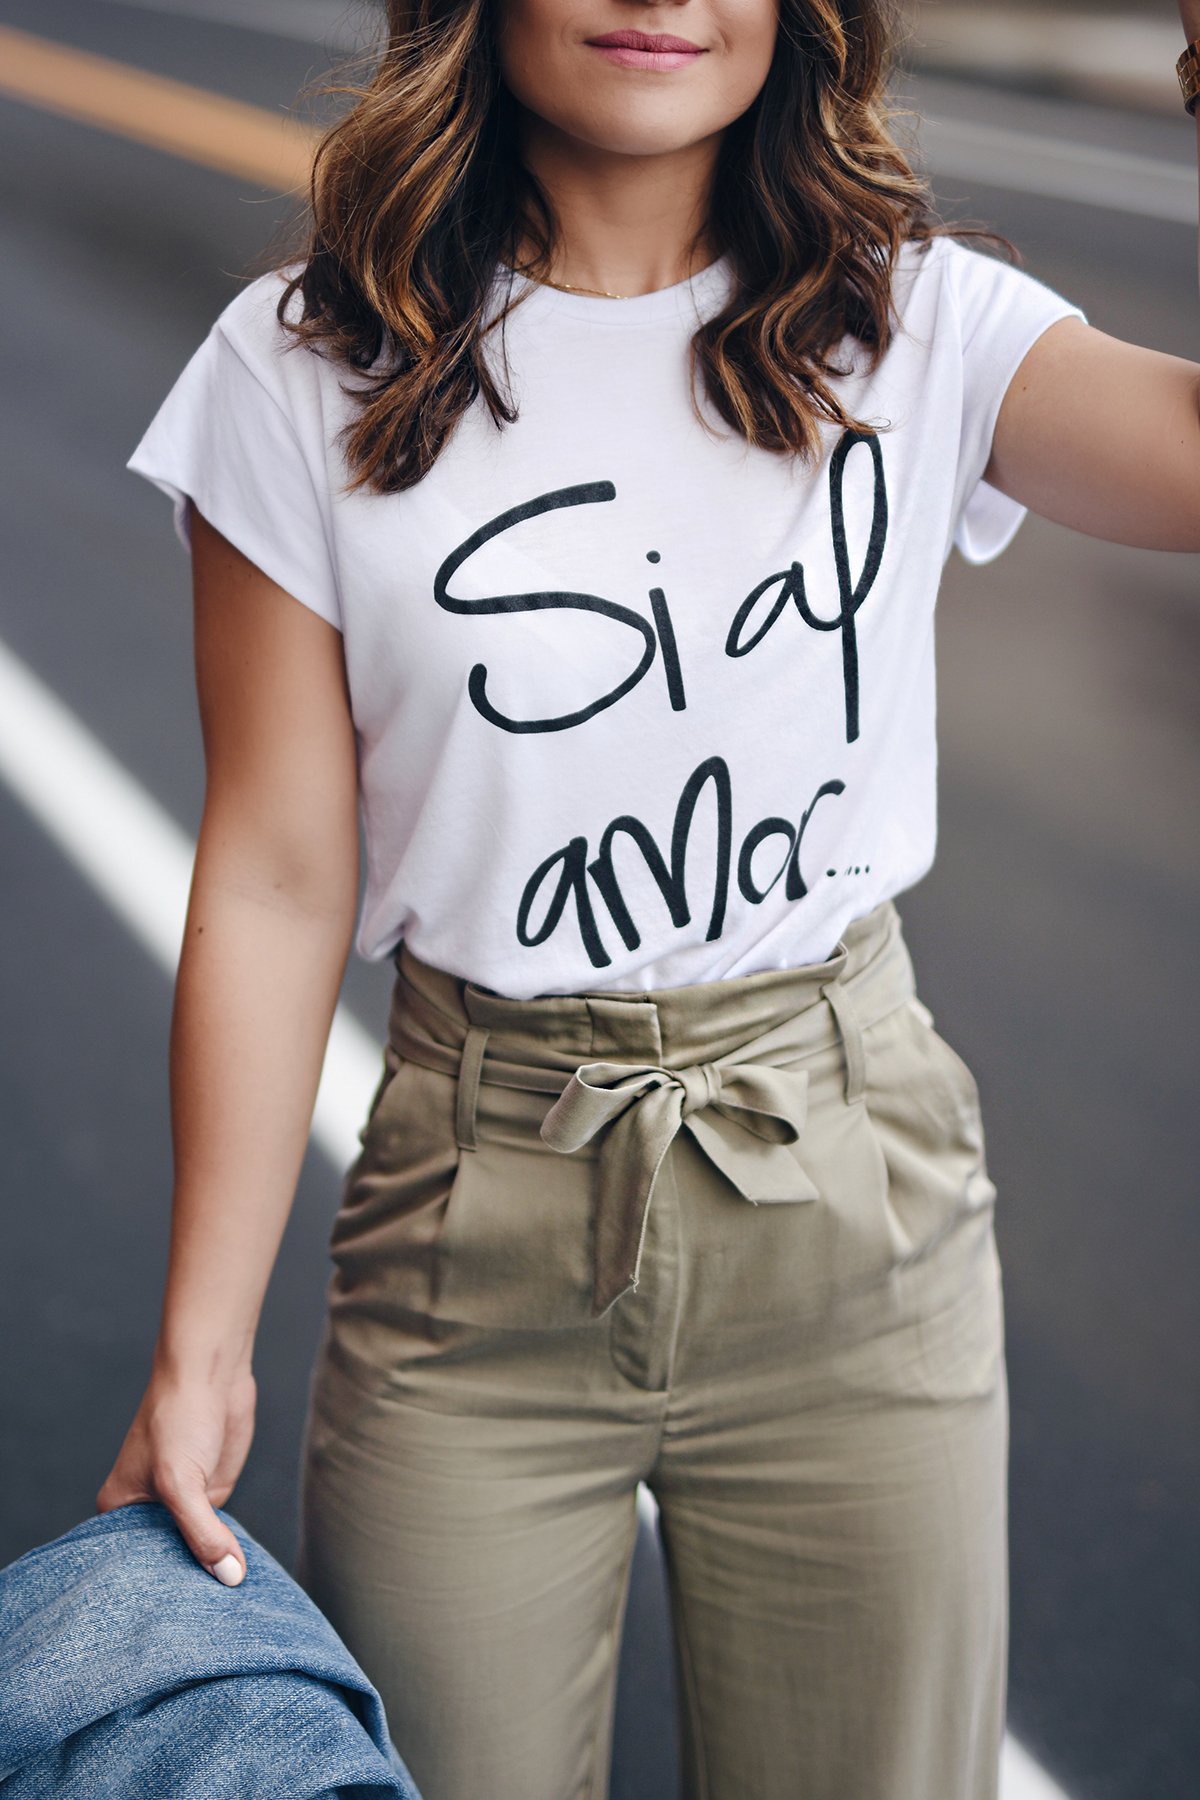 Carolina Hellal of Chic Talk wearing a t-shirt from the Si al amor t-shirt collection by popular Denver fashion blogger Chic Talk